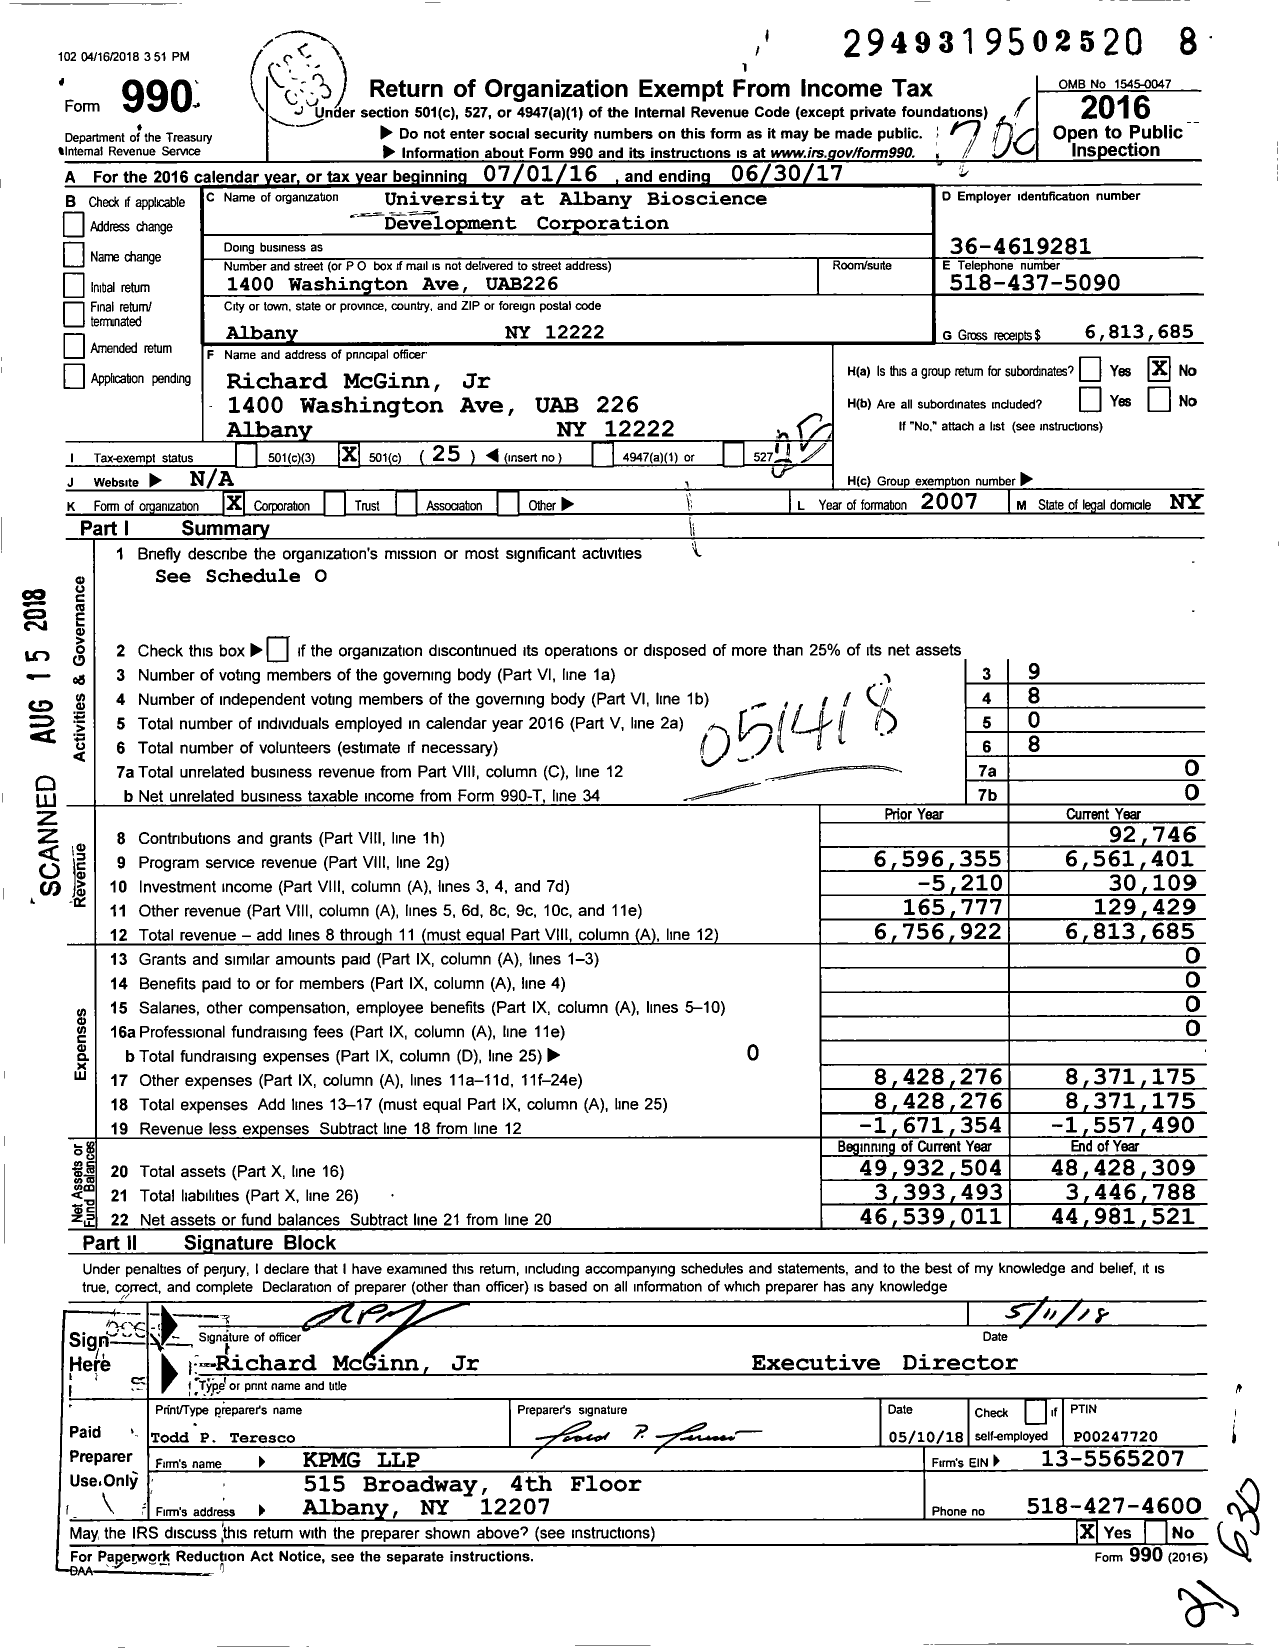 Image of first page of 2016 Form 990O for University at Albany Bioscience Development Corporation